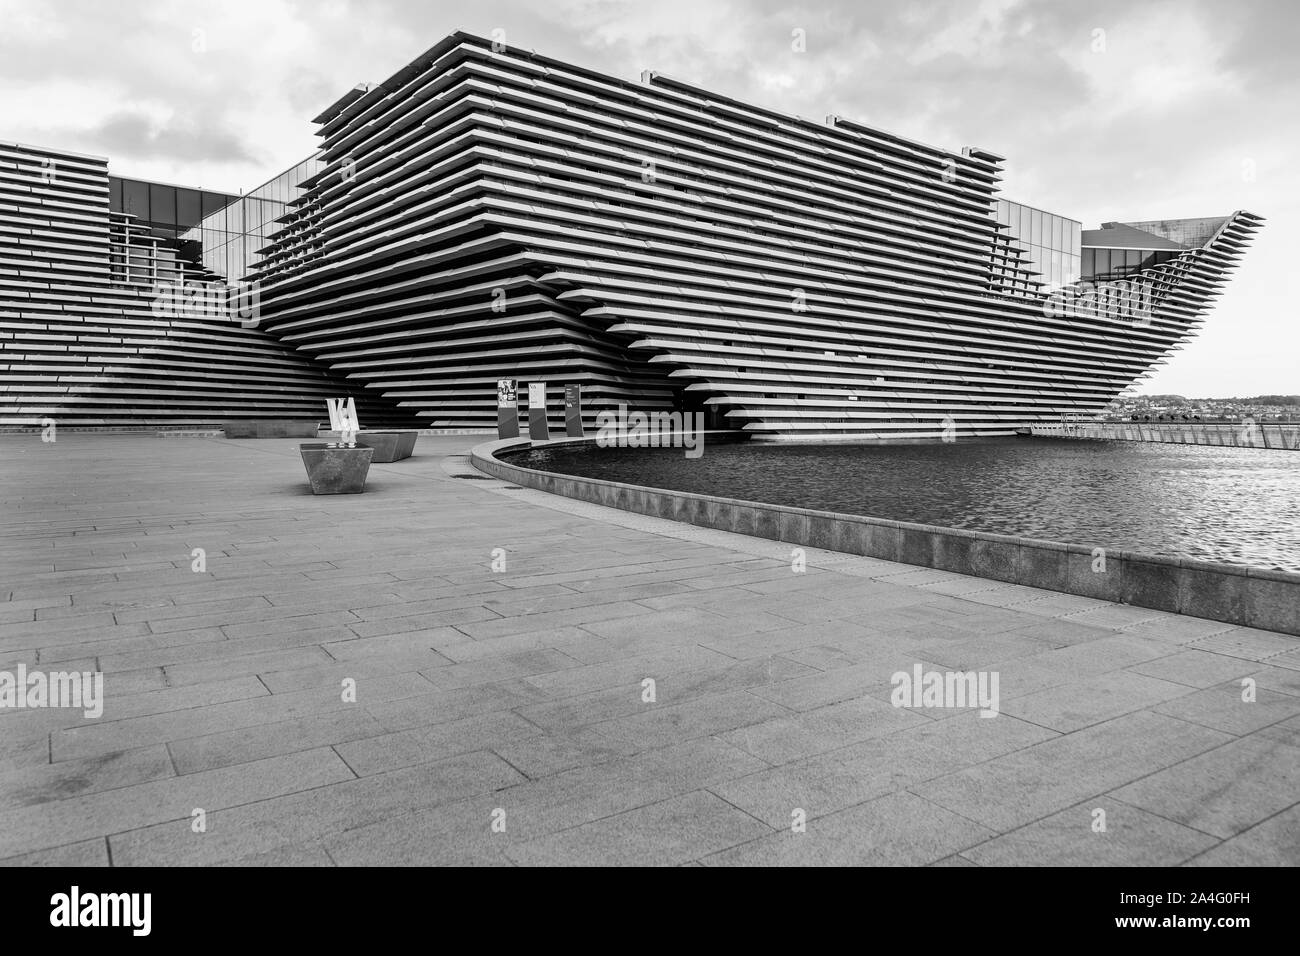 Die eindrucksvolle V&A Museum in Dundee Dundee an der Waterfront. Stockfoto